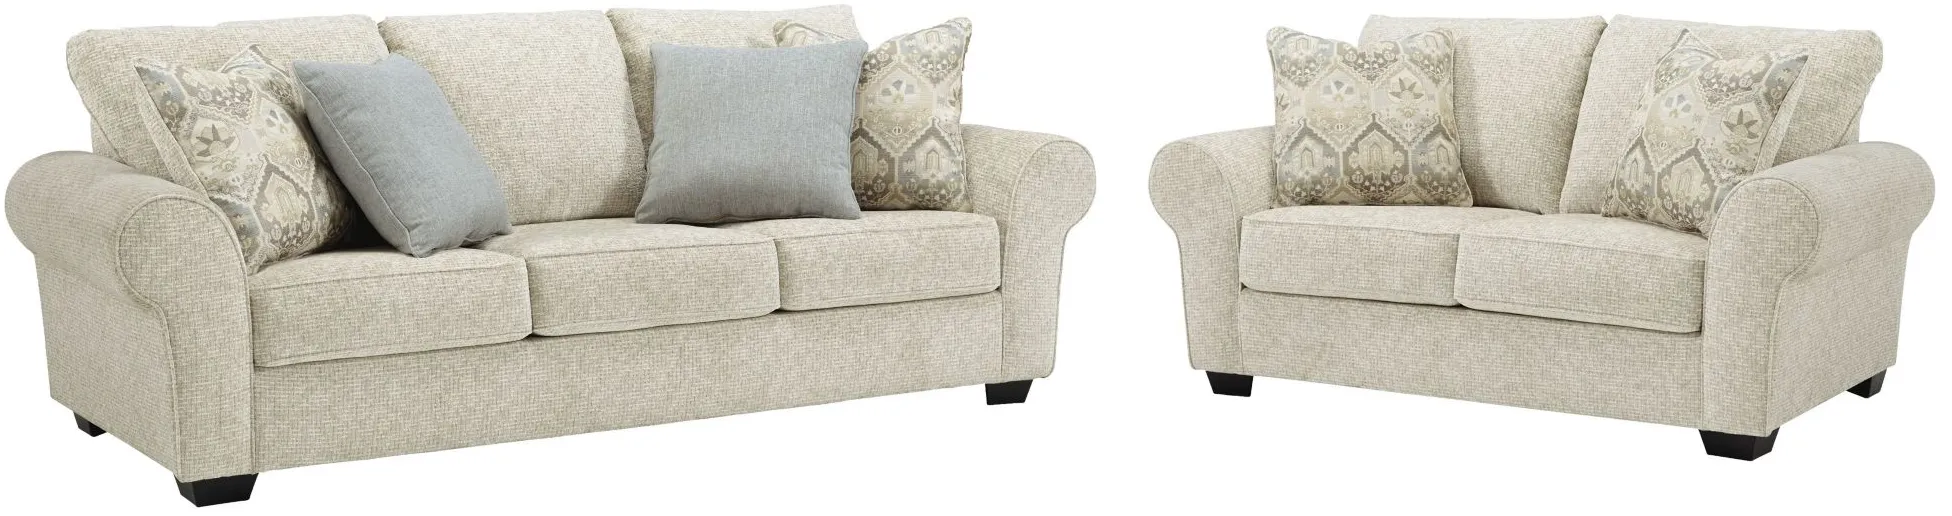 Haisley 2-pc. Sofa and Loveseat Set in Ivory by Ashley Furniture